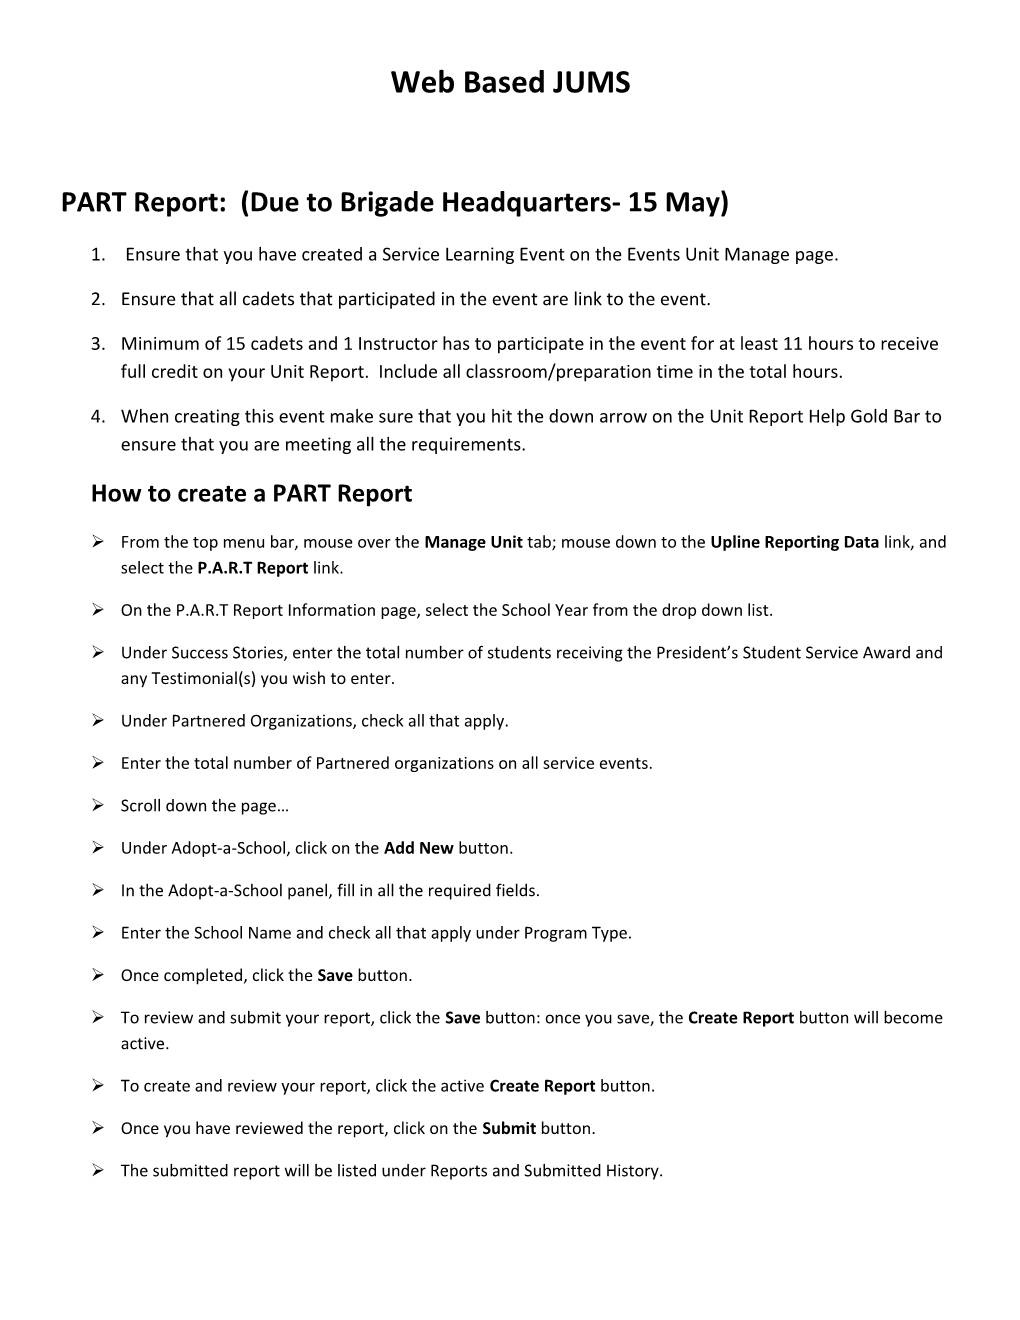 PART Report: (Due to Brigade Headquarters- 15 May)